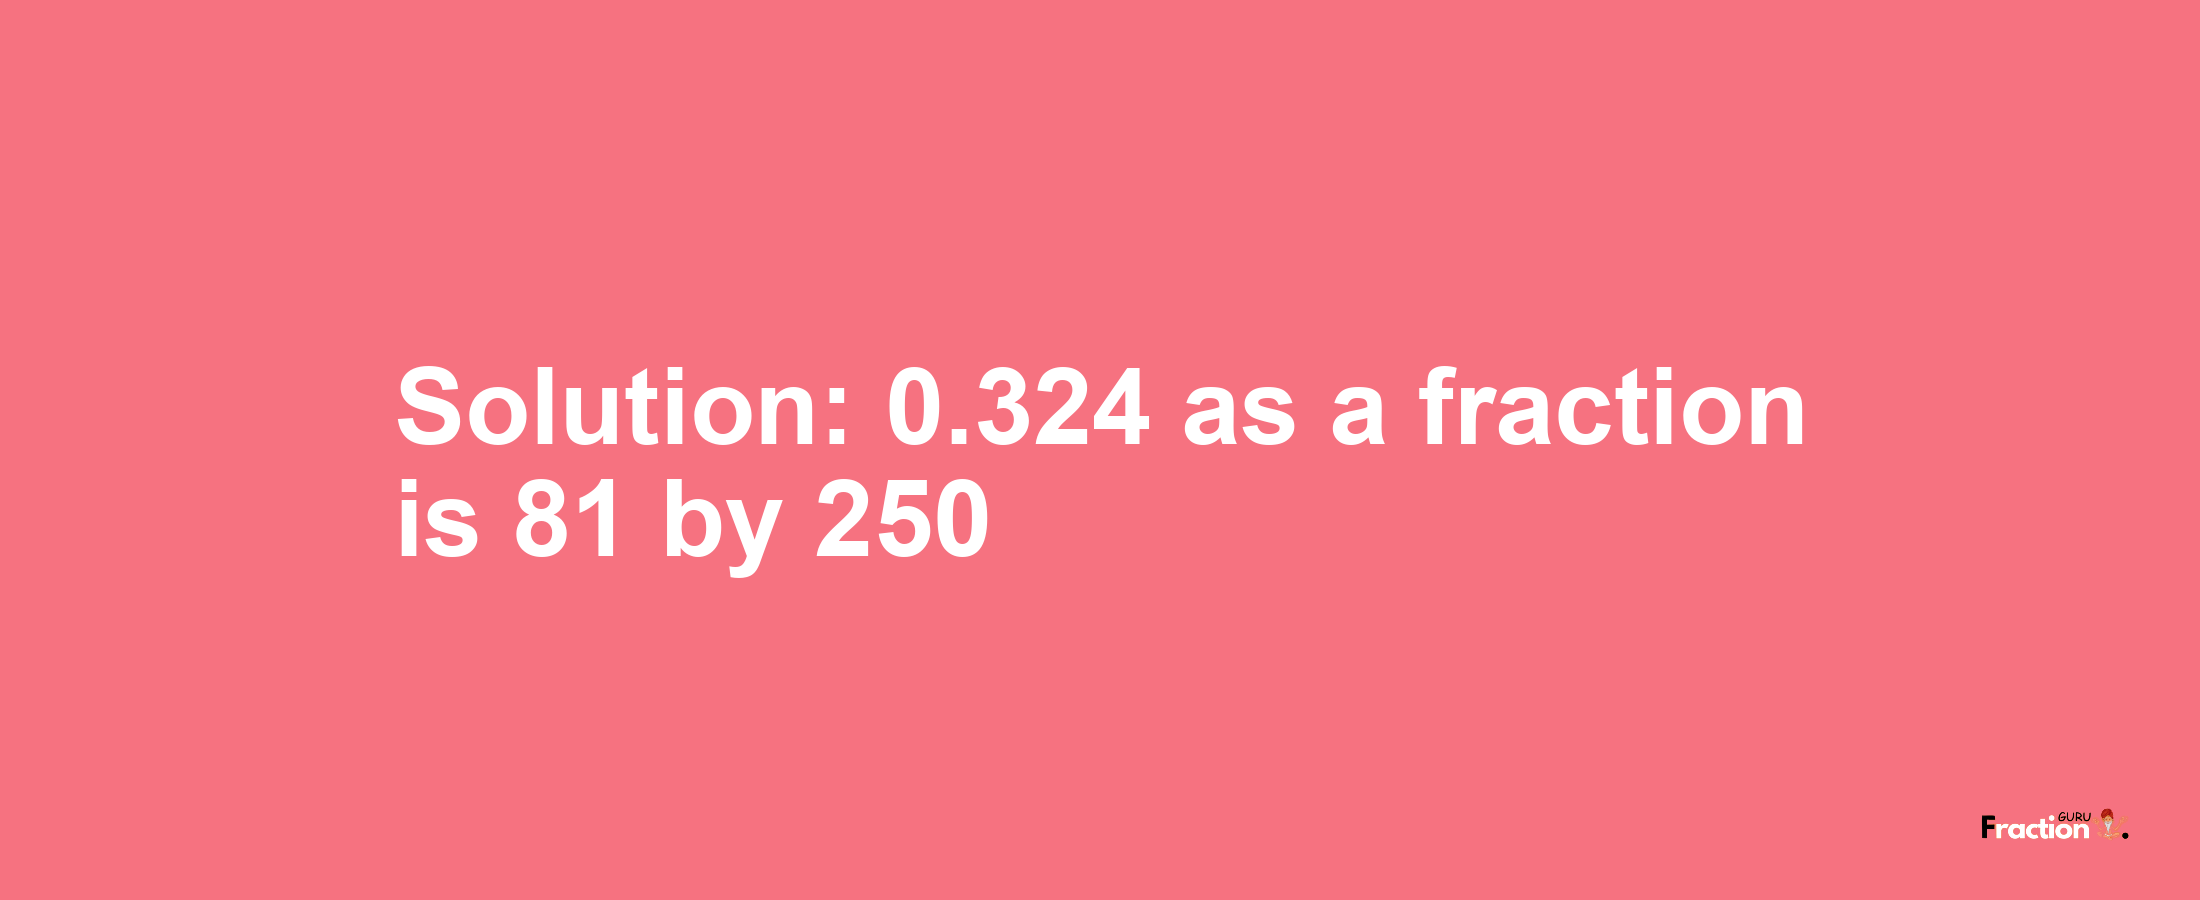 Solution:0.324 as a fraction is 81/250